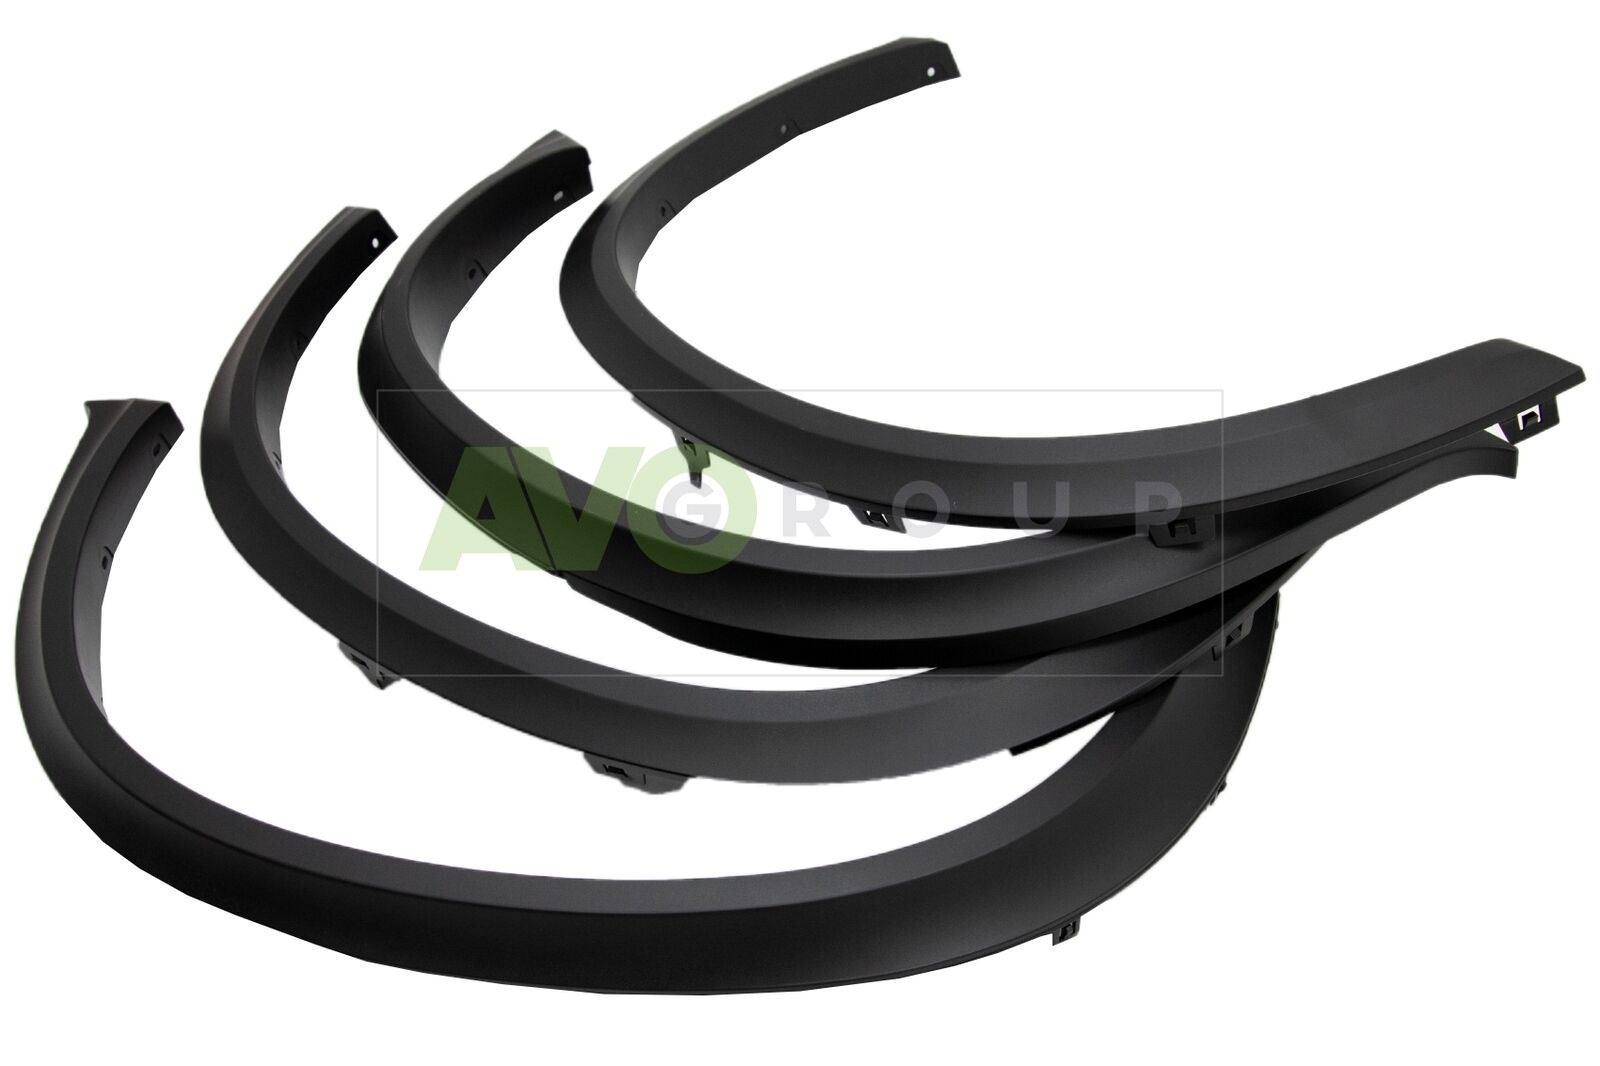 Wheel Arches Fender Flares with Clips for BMW X5 E70 2007-2013 M Design